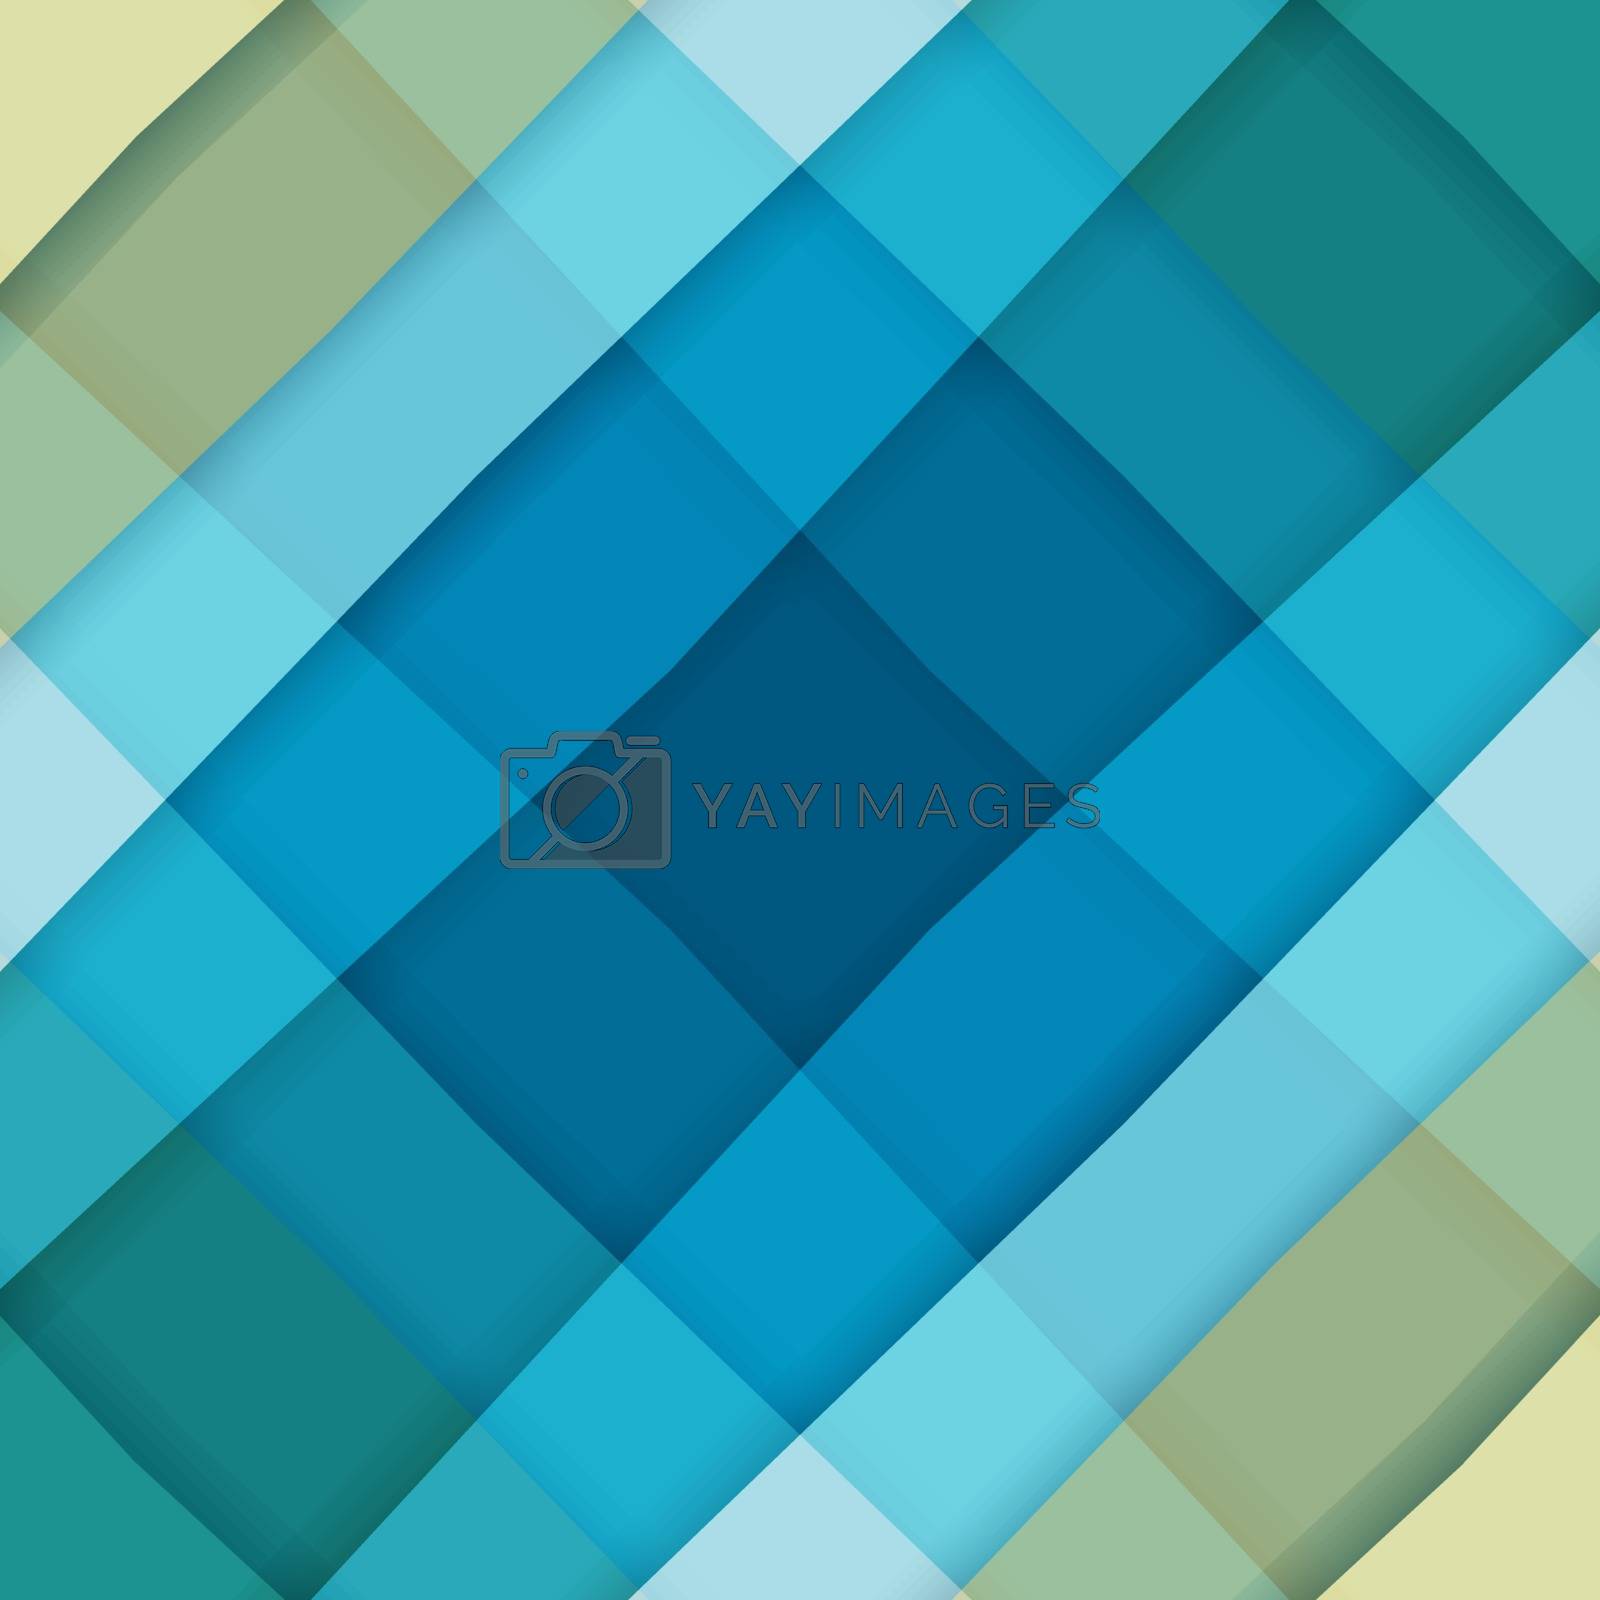 Royalty free image of Vector abstract background by ggebl